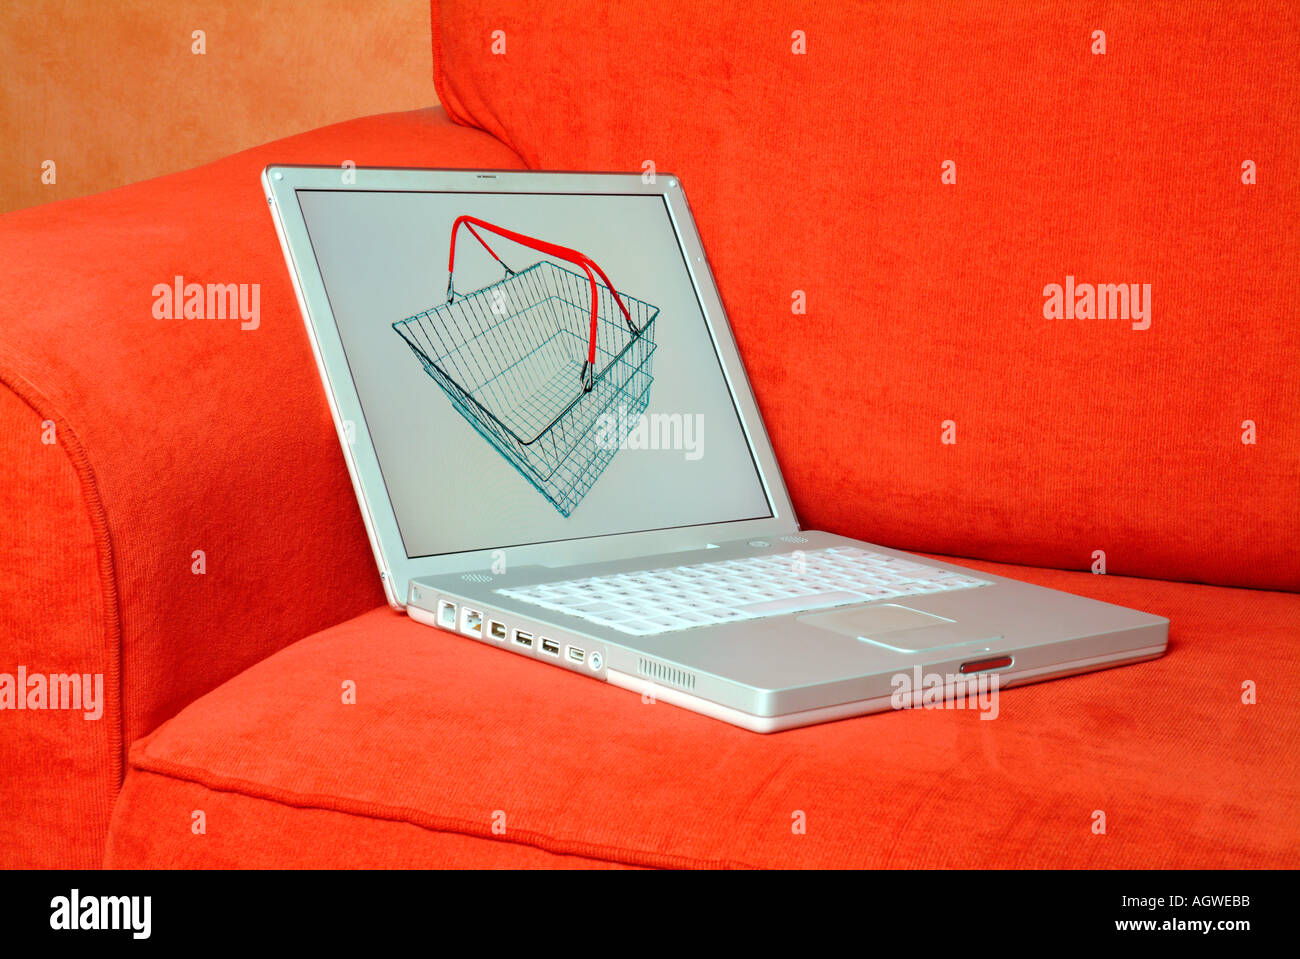 laptop computer on a red sofa Stock Photo